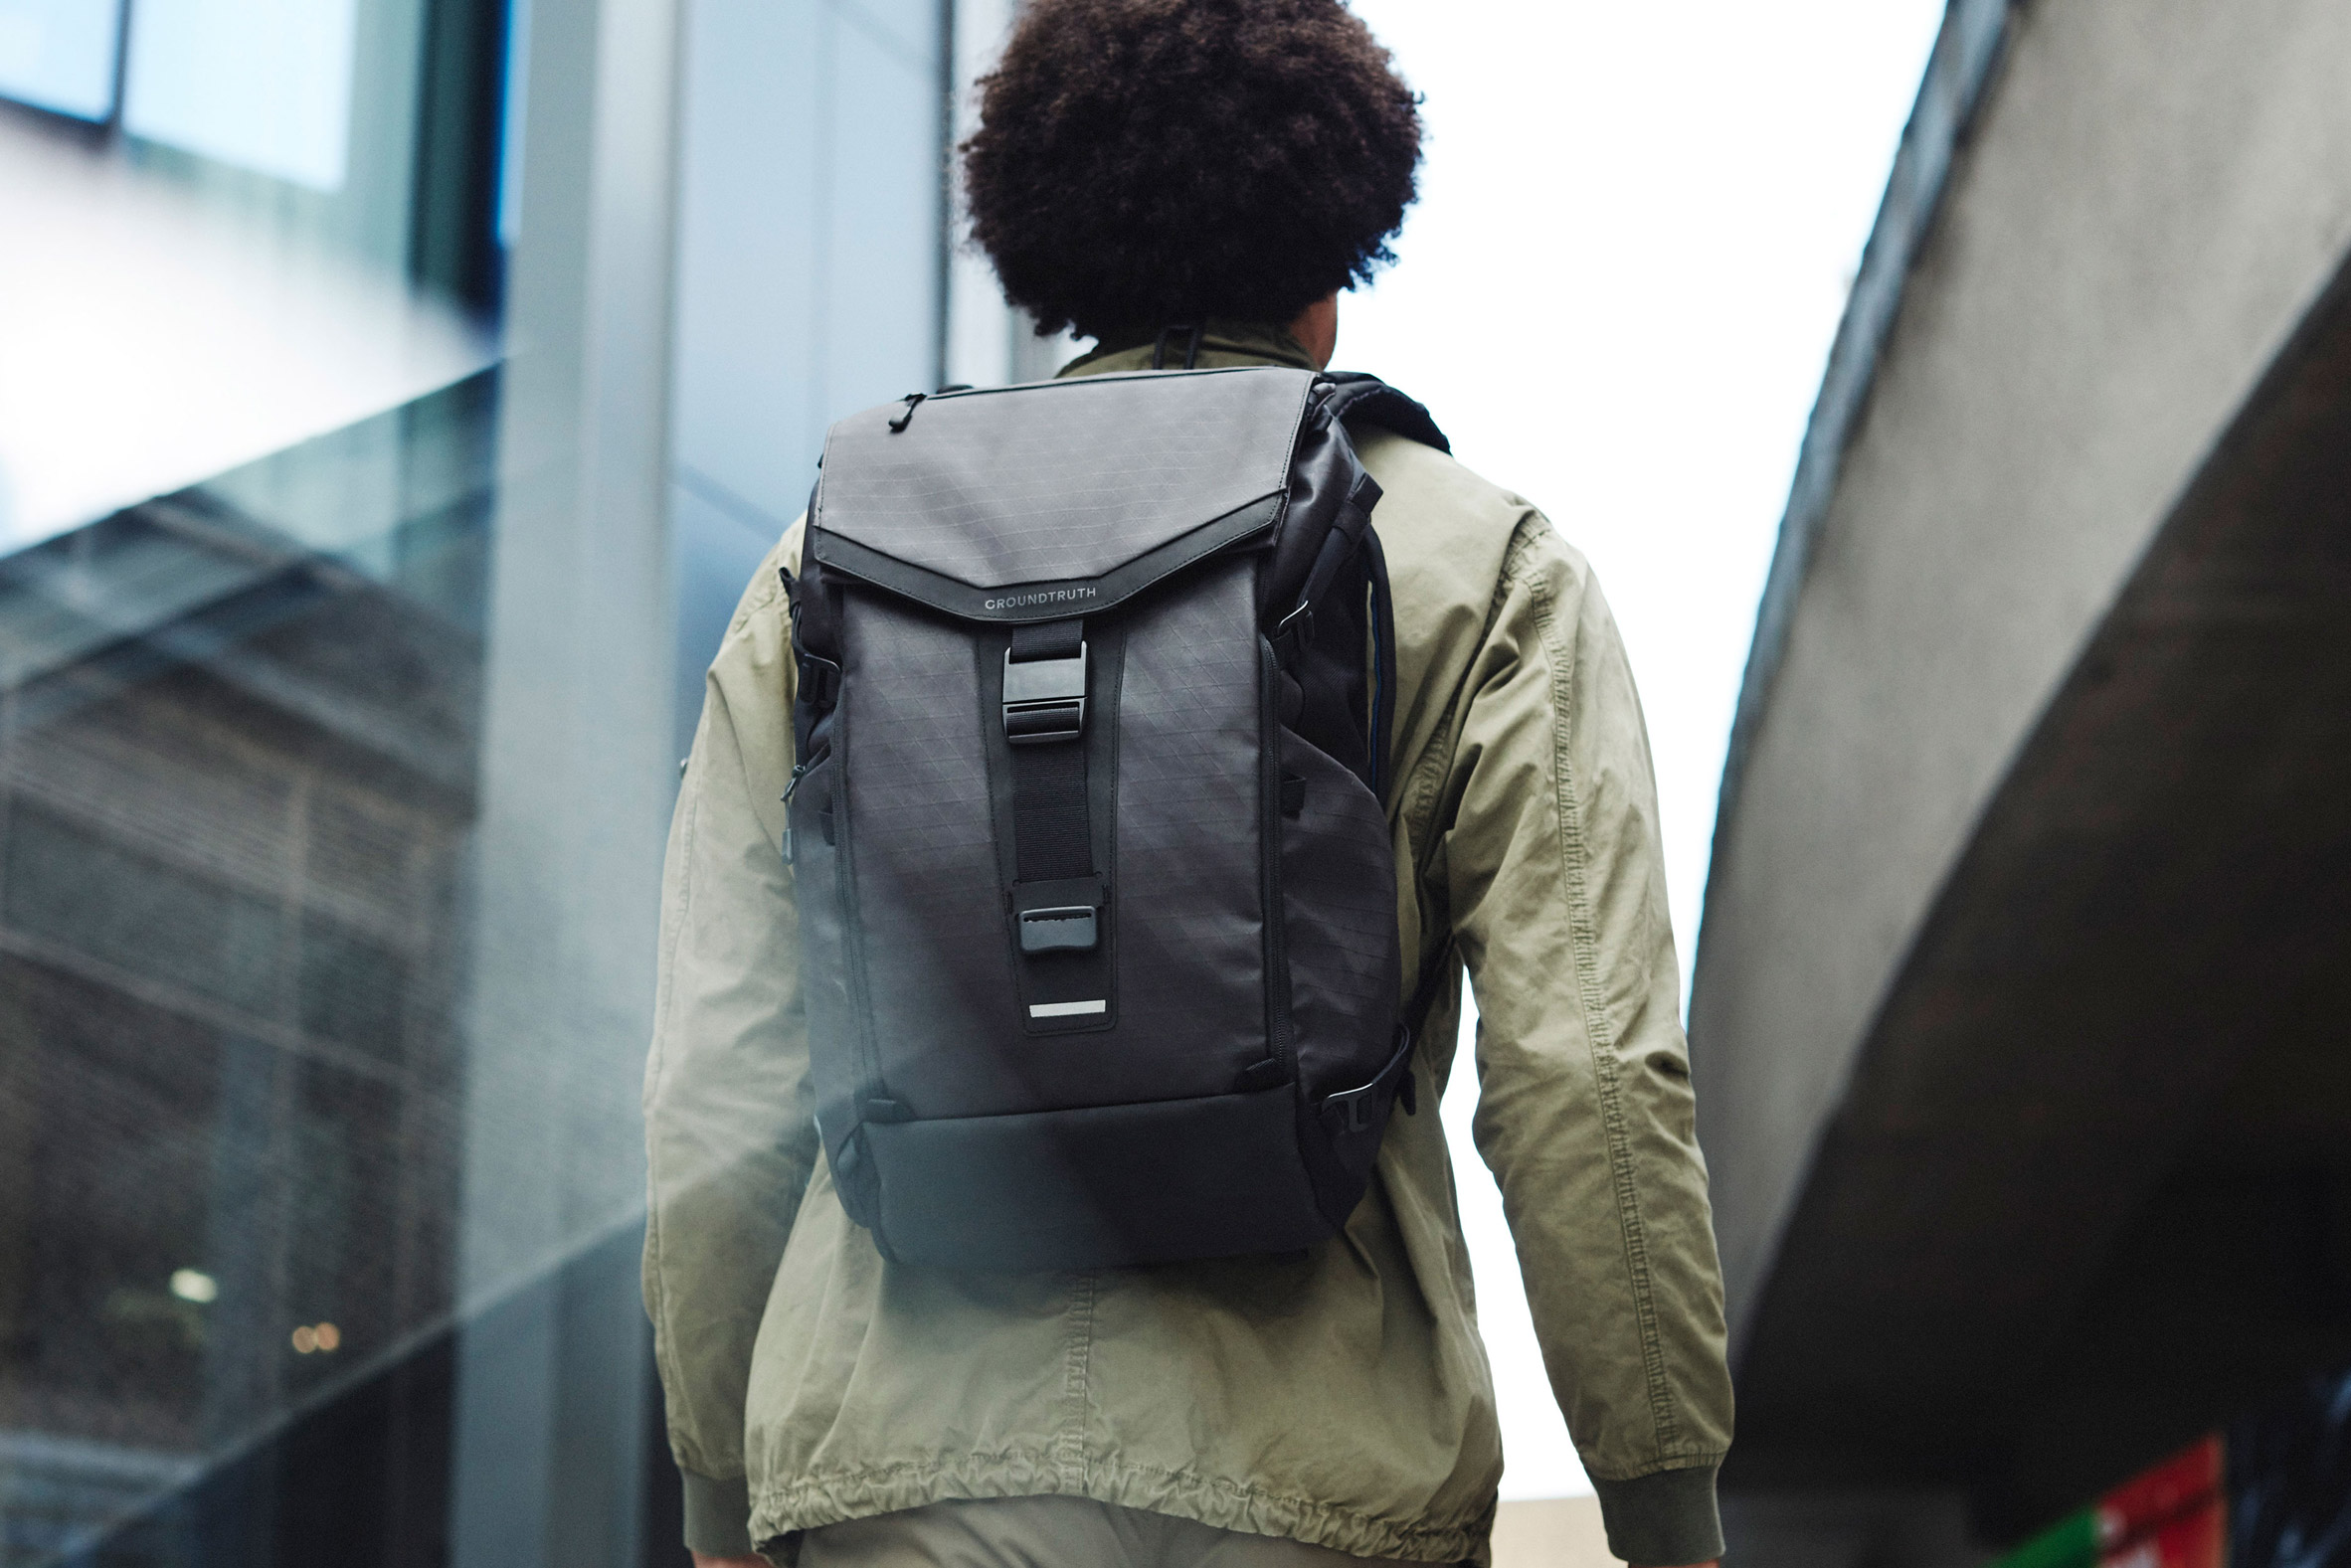 Groundtruth's recycled plastic backpack can withstand Arctic conditions